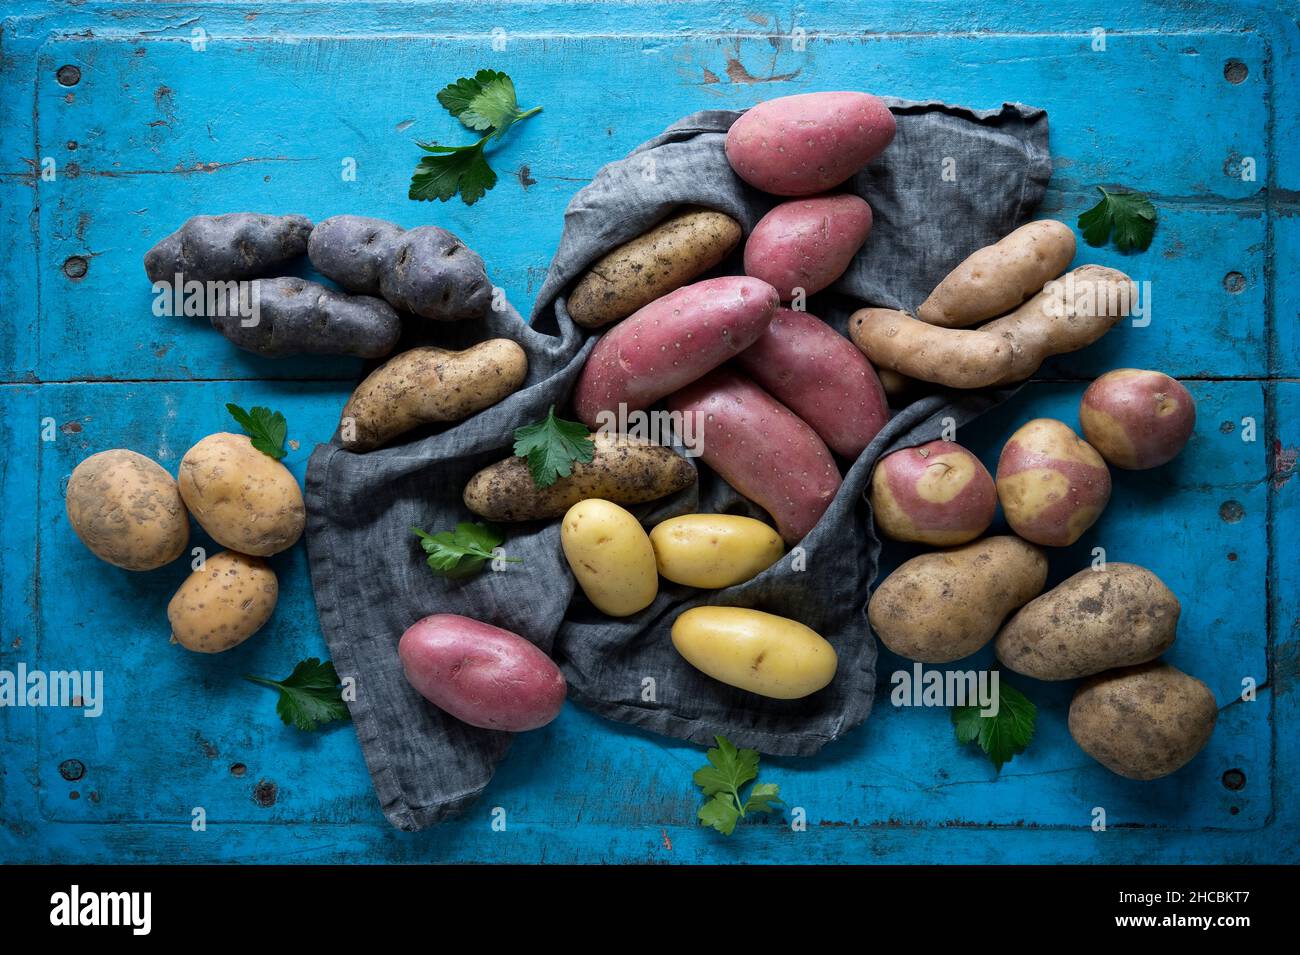 Studio shot of different variety of raw potatoes lying on blue painted wooden surface Stock Photo